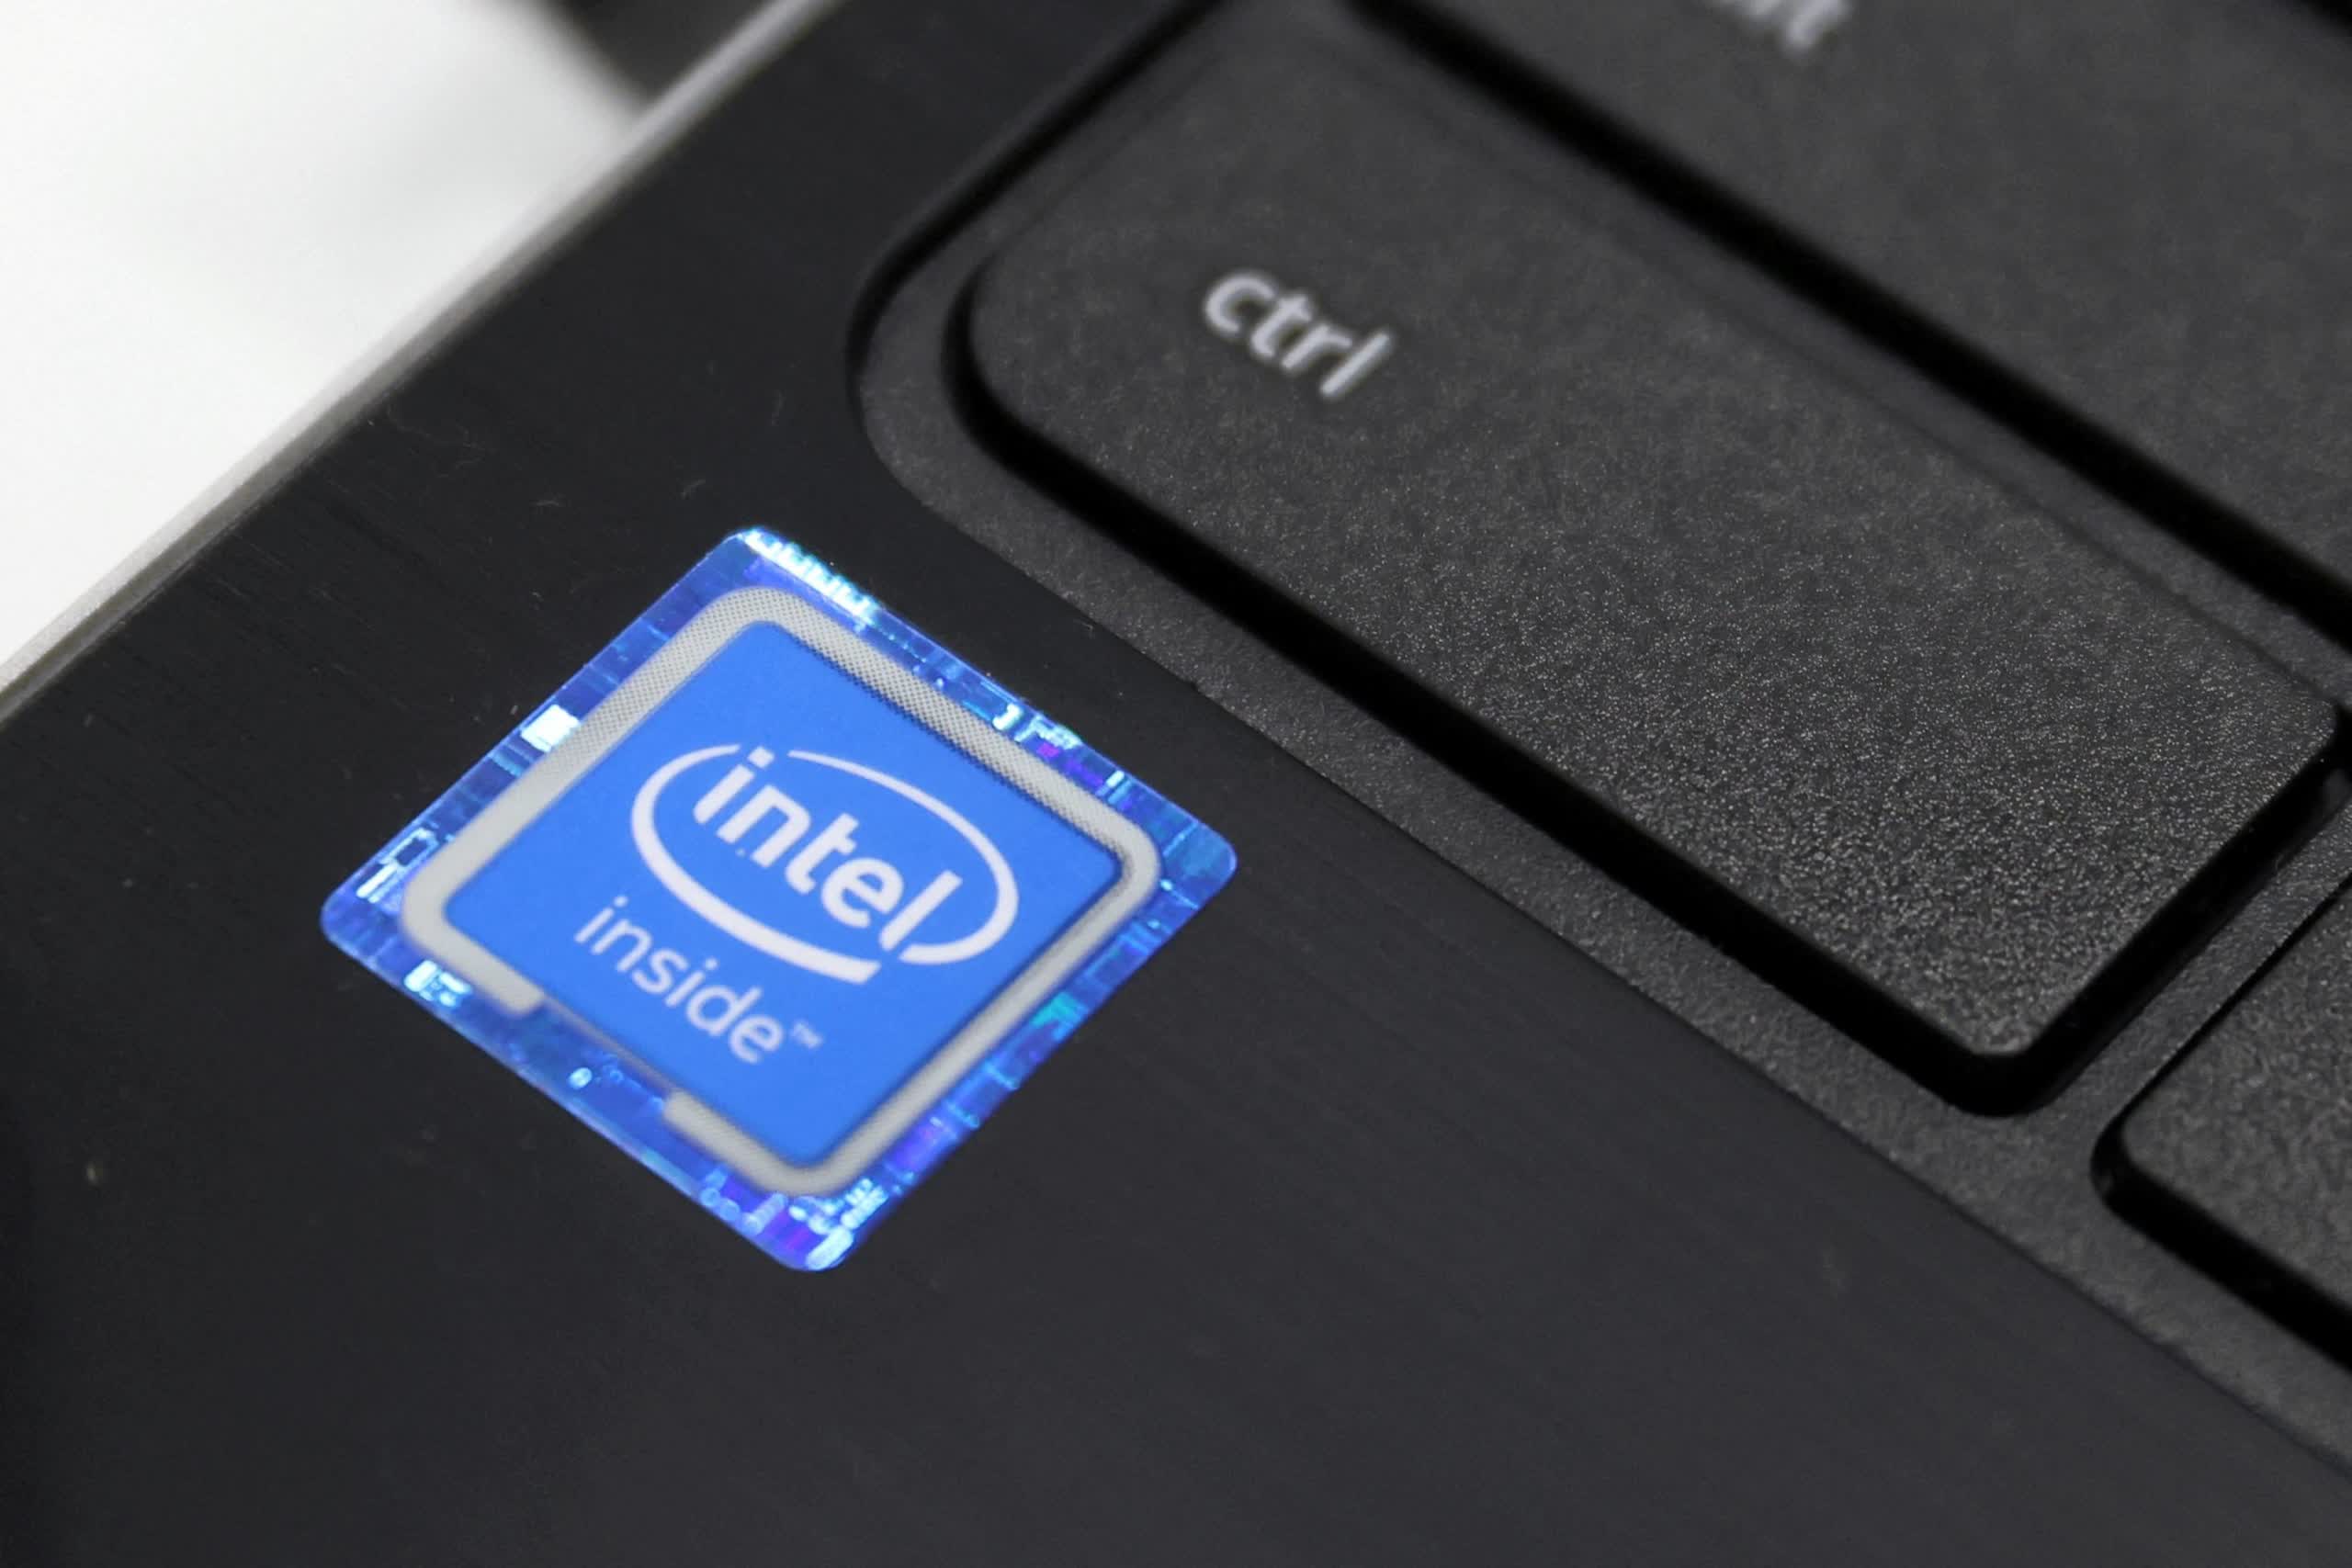 Lost your Intel Inside sticker? Get a new one for free